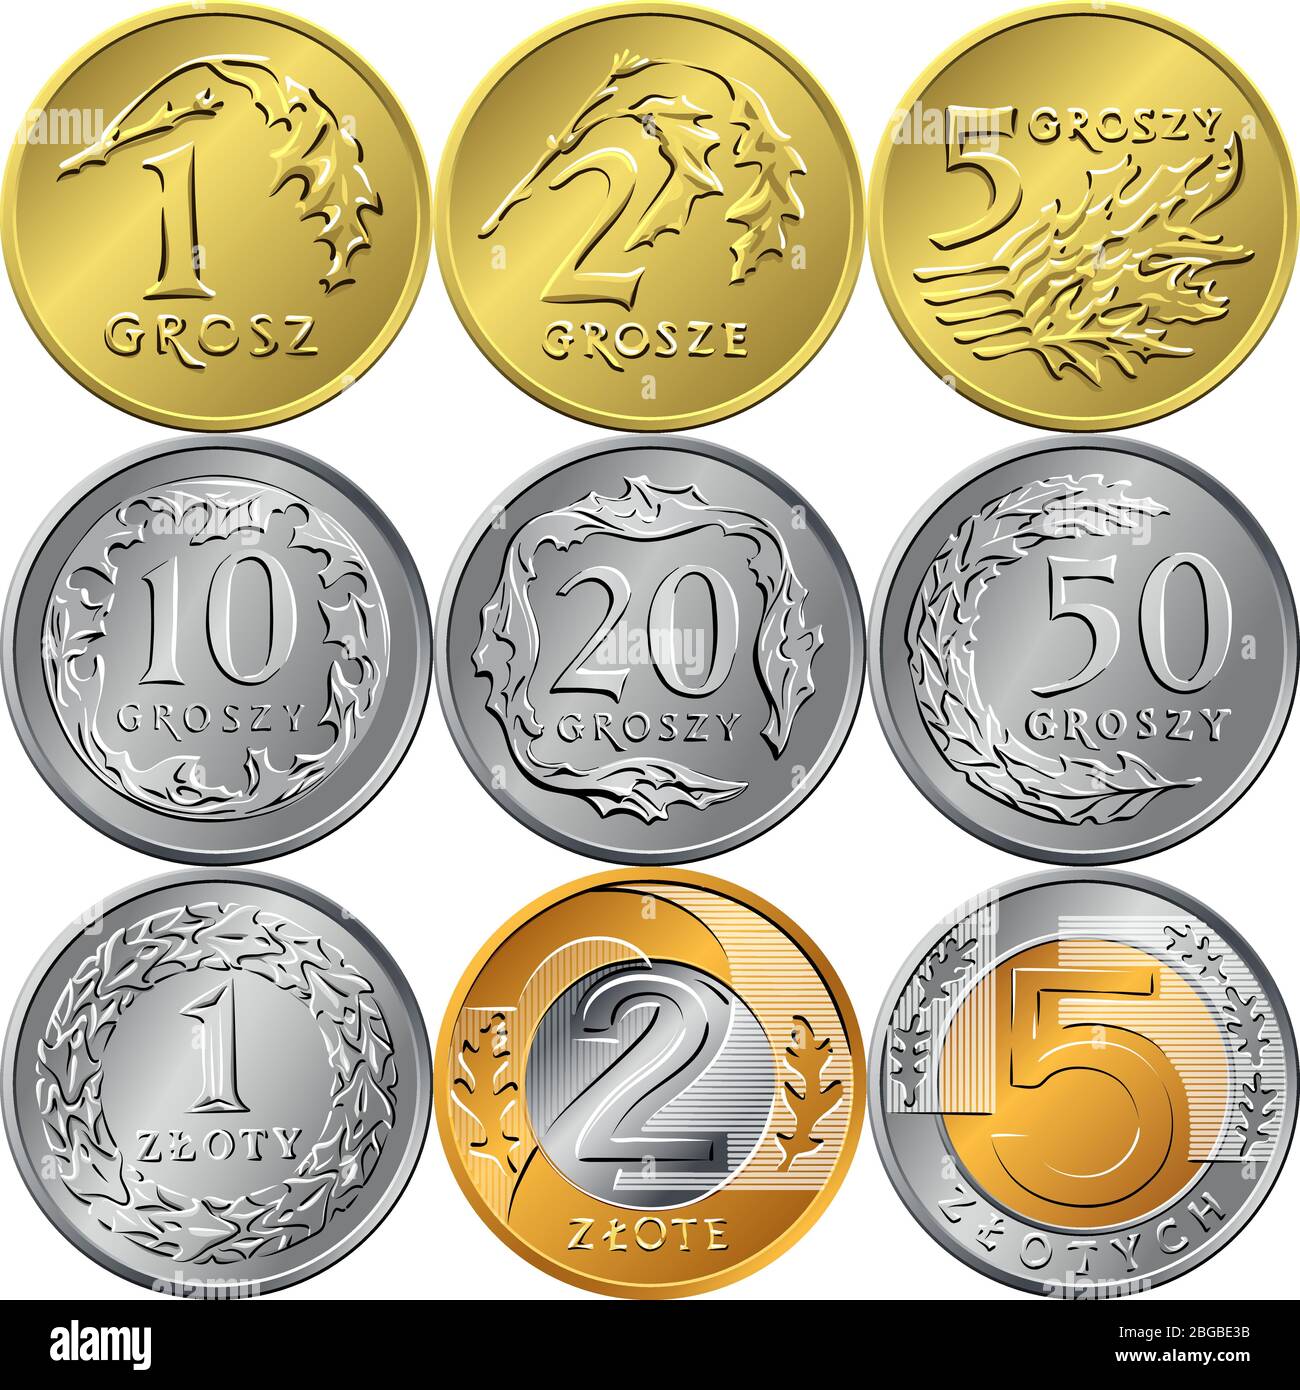 vector set of reverse Polish Money zloty and grosz gold and silver coins with Value and eagle in a crown Stock Vector